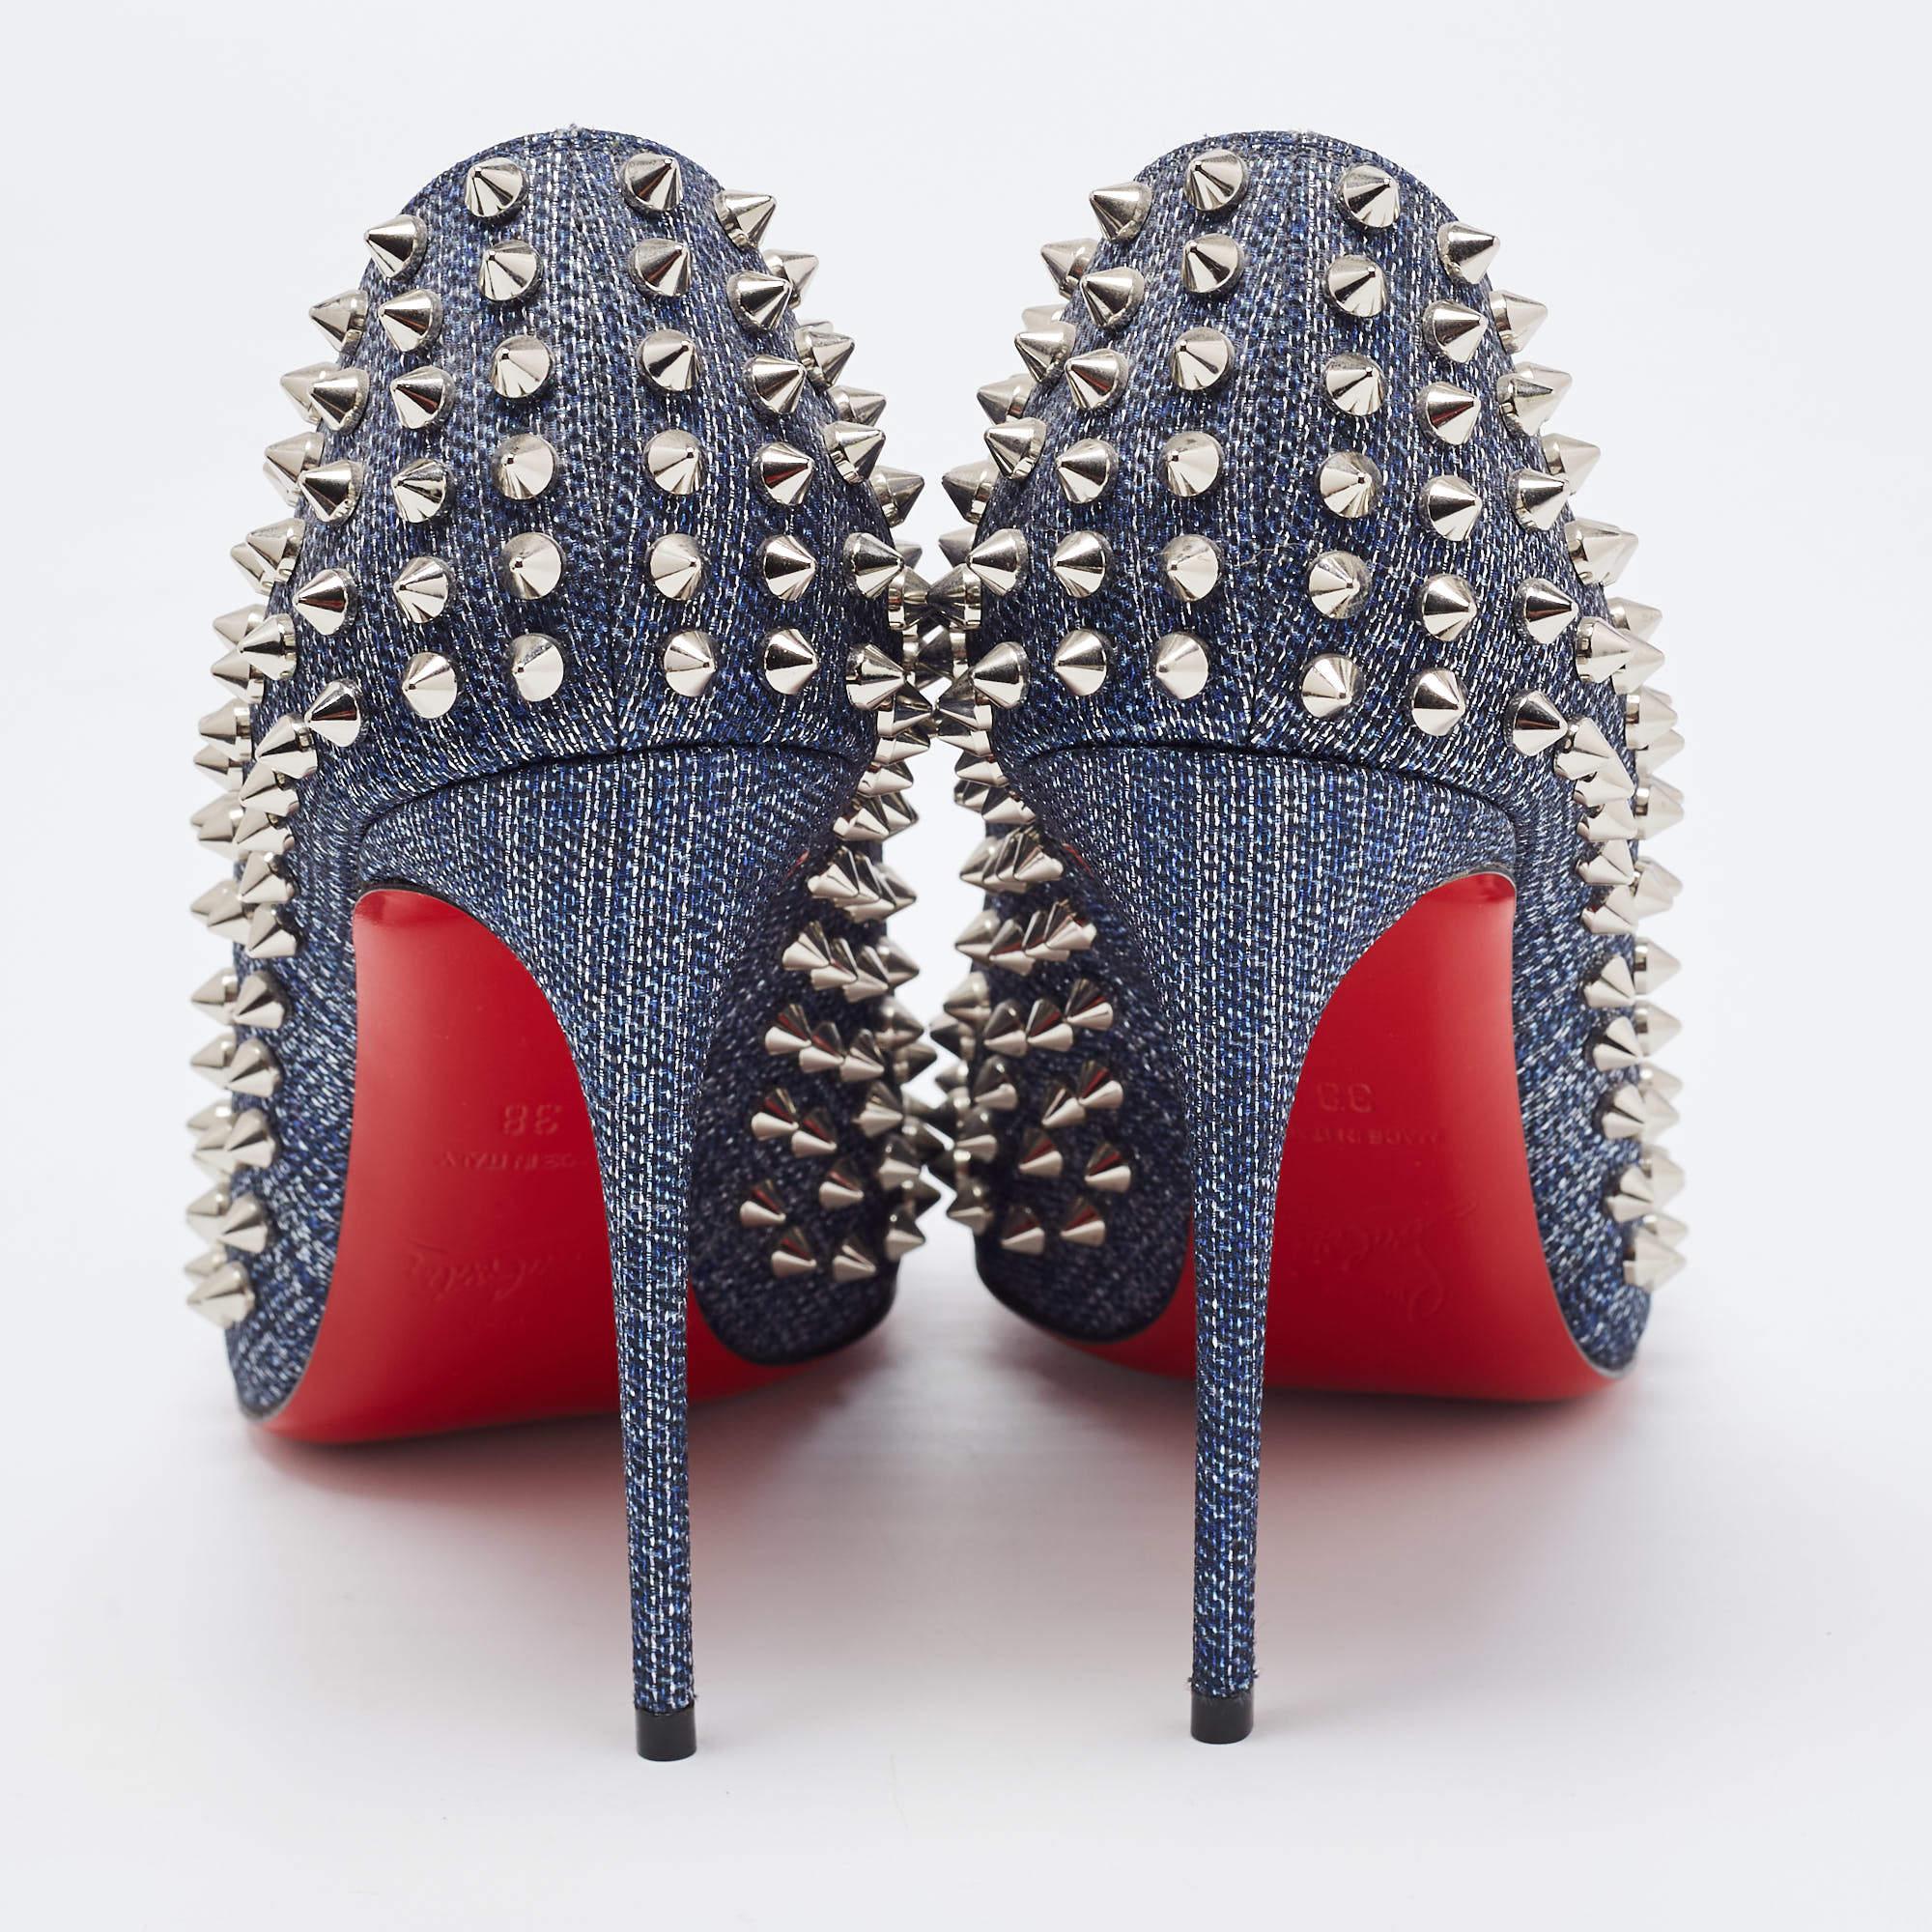 Curvaceous arches, a feminine appeal, and a well-built structure define this set of Christian Louboutin pumps. Coming with comfortable insoles and sleek heels, style them with your favorite outfits.

